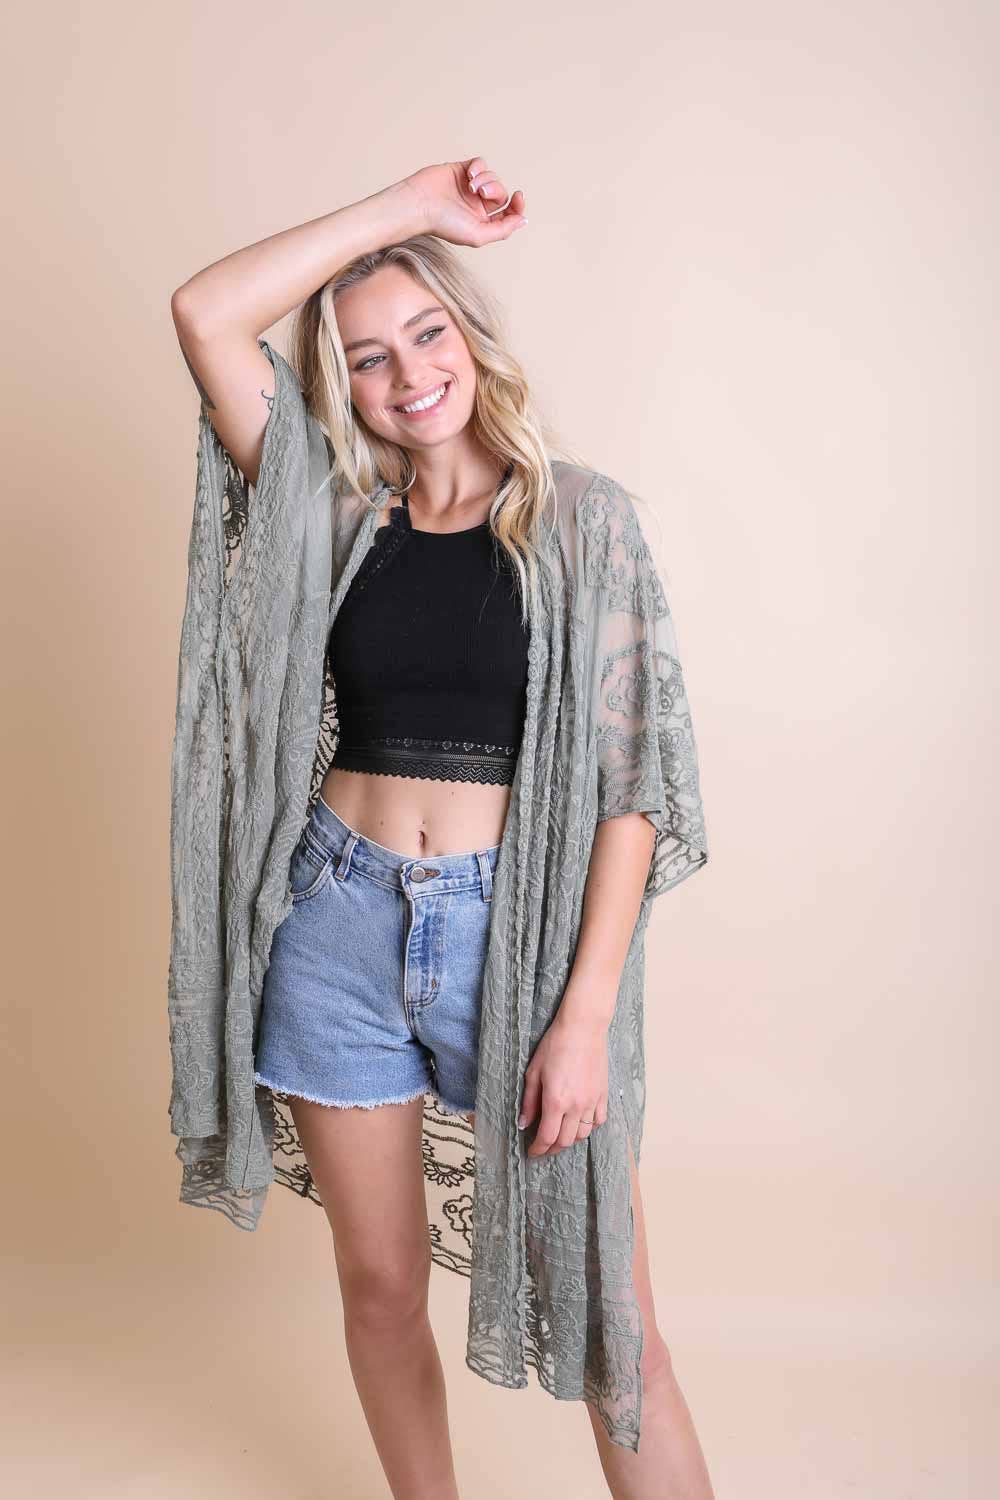 -Mandala Kimono Cover Up-  Another great layering piece that is wonderful for a swimwear cover up.   100% Viscose, Wash cold, hang to dry.